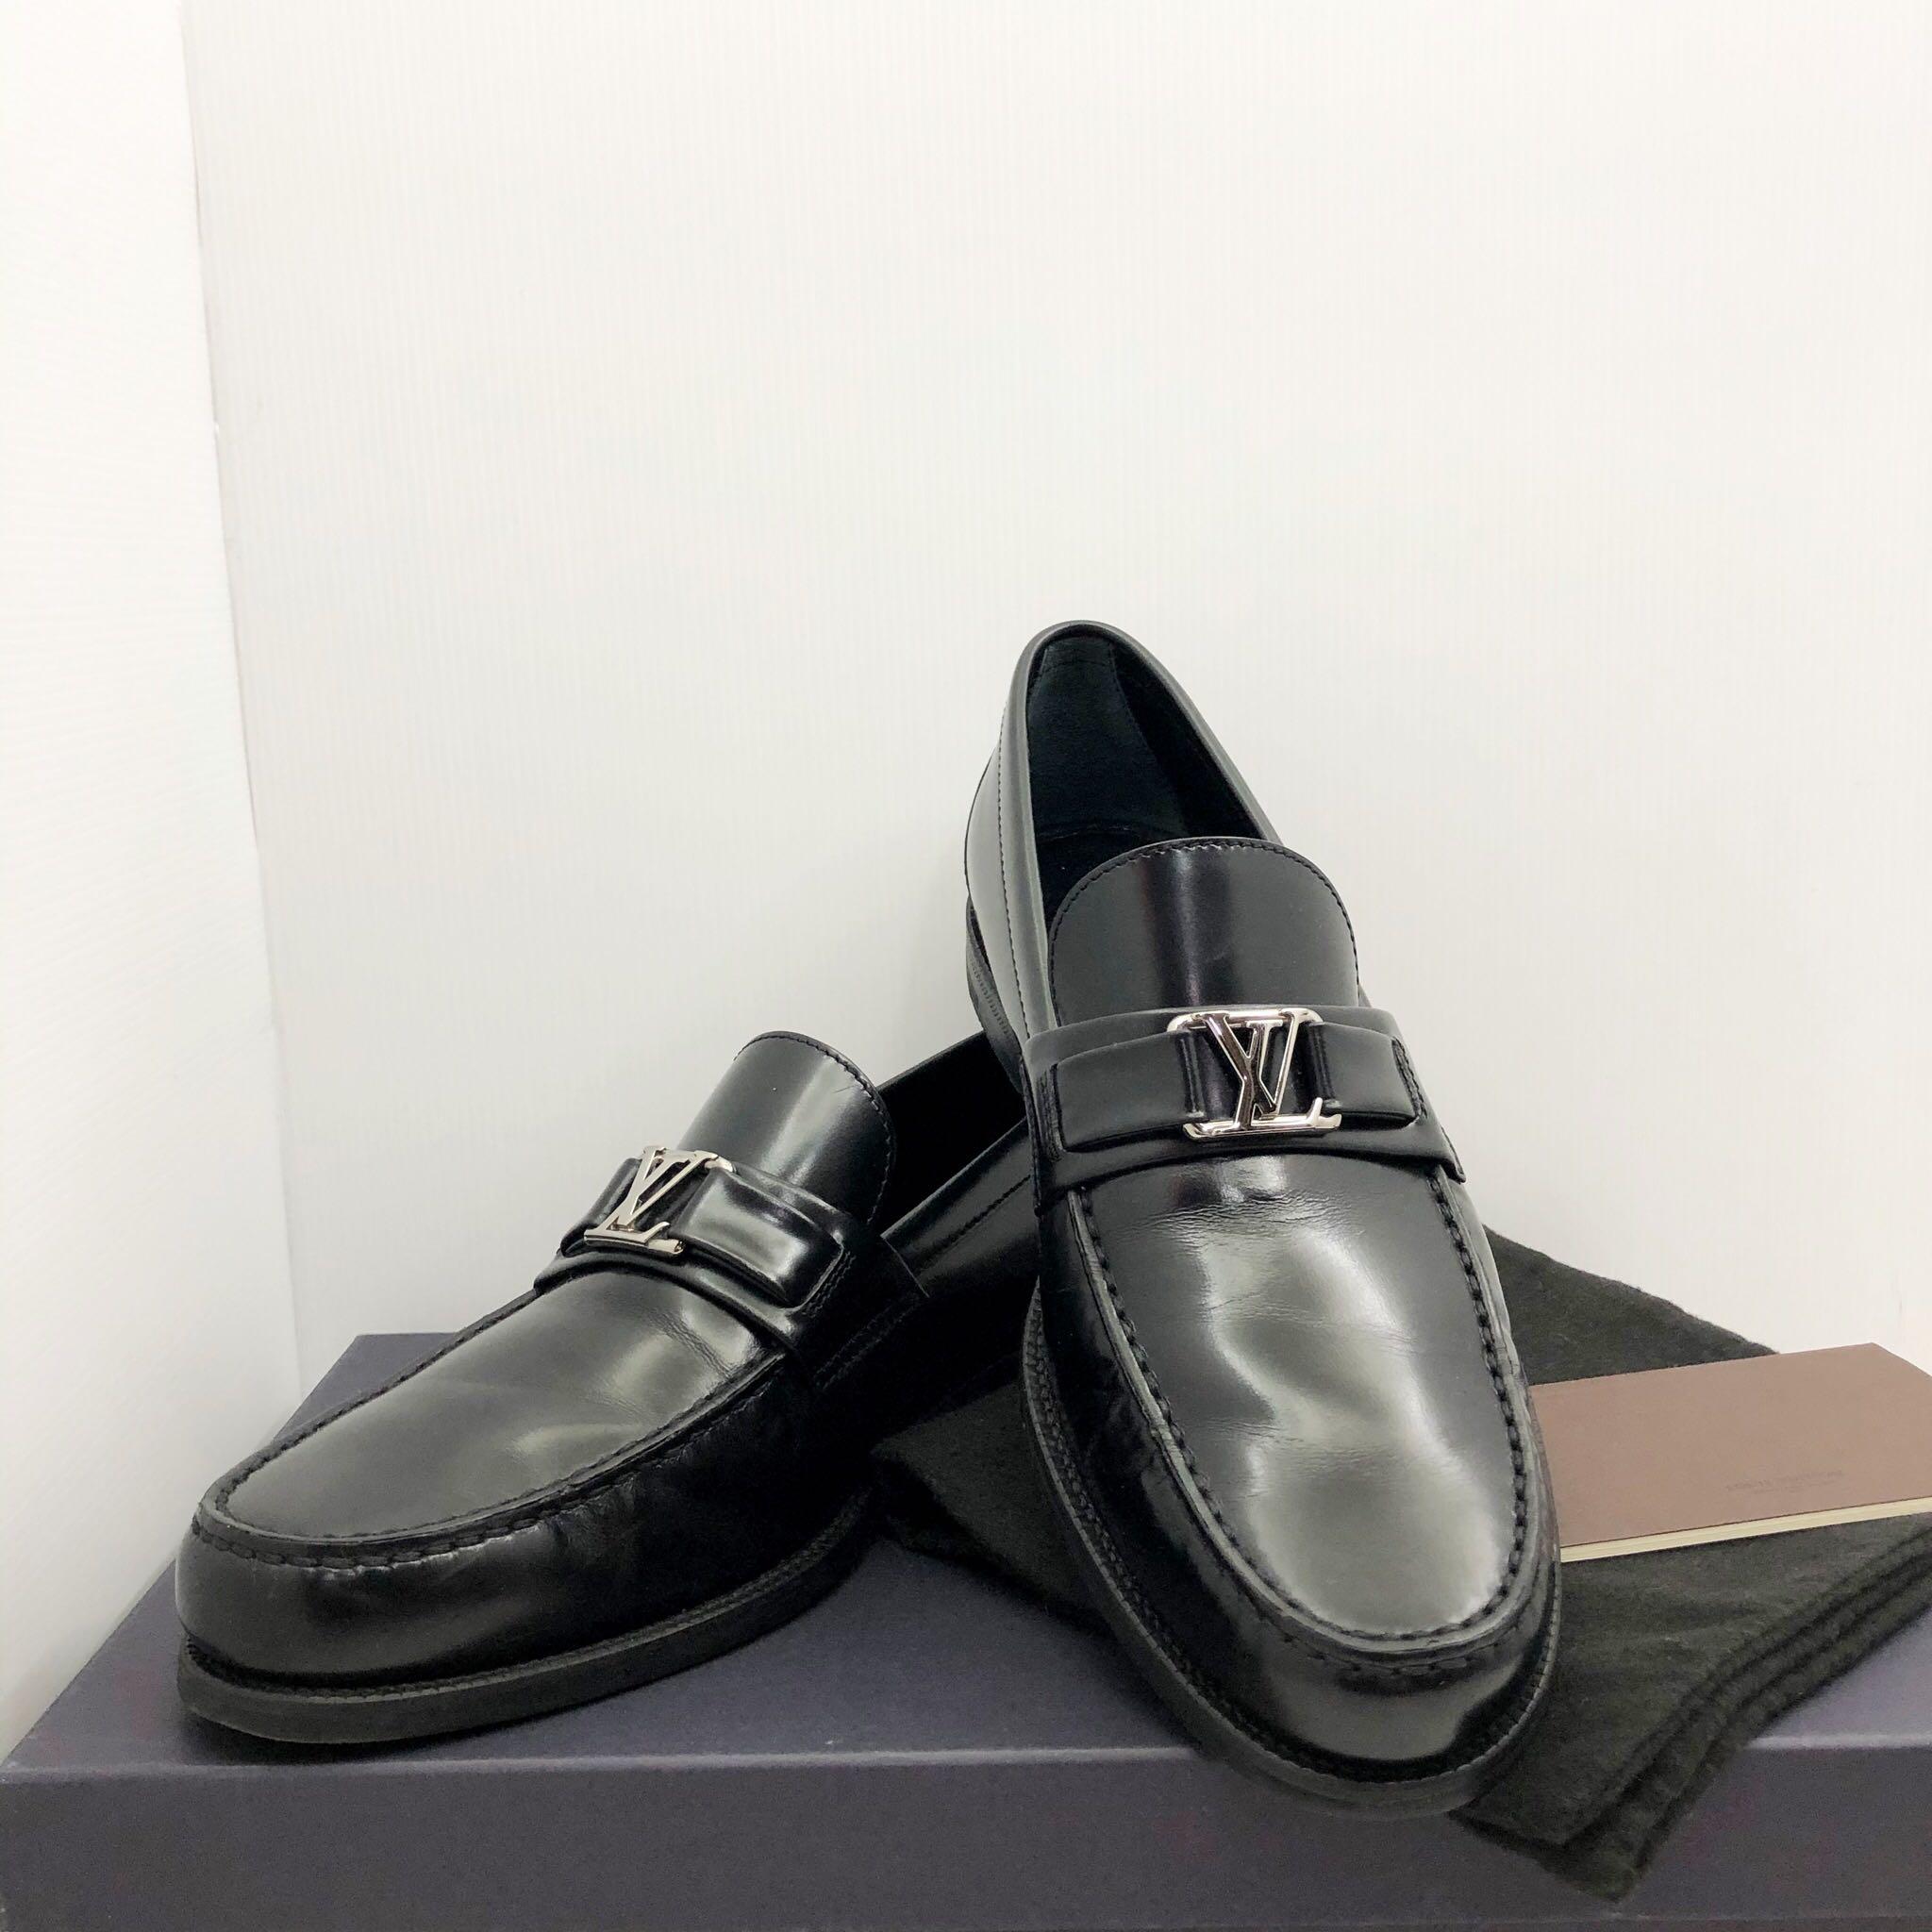 LOUIS VUITTON FORMAL SHOES FOR MEN » Buy online from ShopnSafe